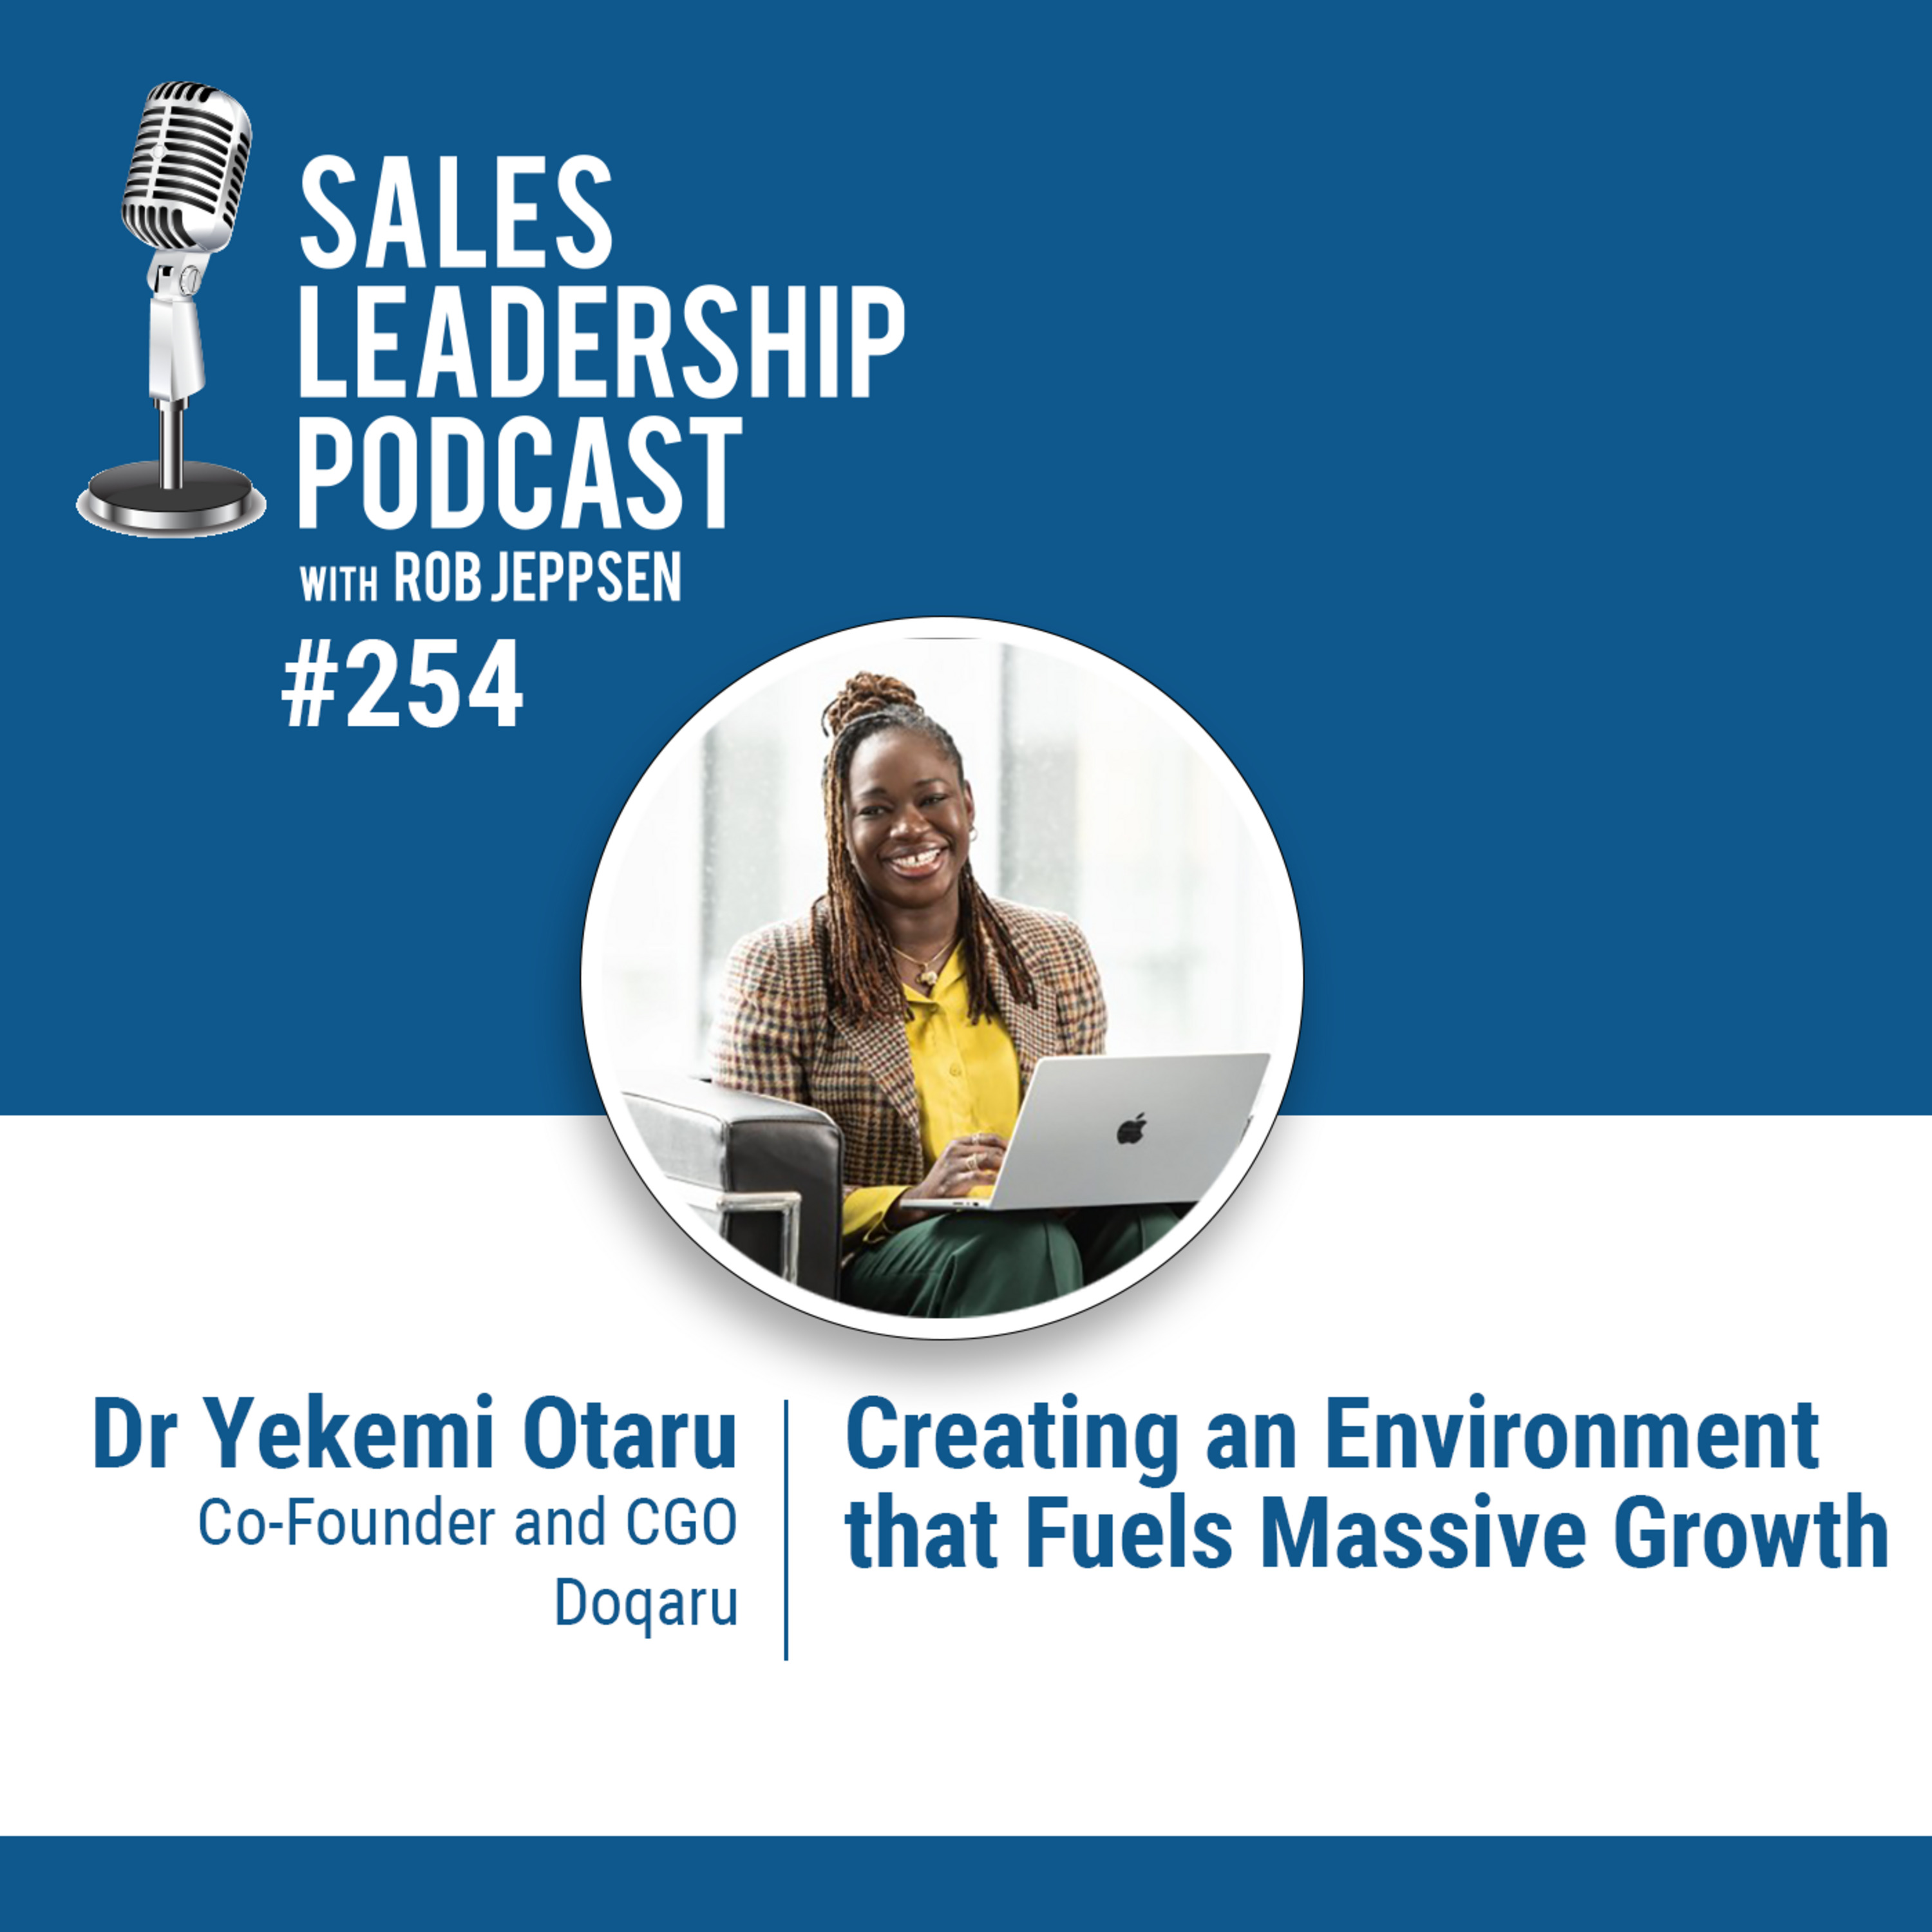 Episode 254: Dr Yekemi Otaru, Co-founder and Chief Growth Officer at Doqaru: Creating an Environment that Fuels Massive Growth